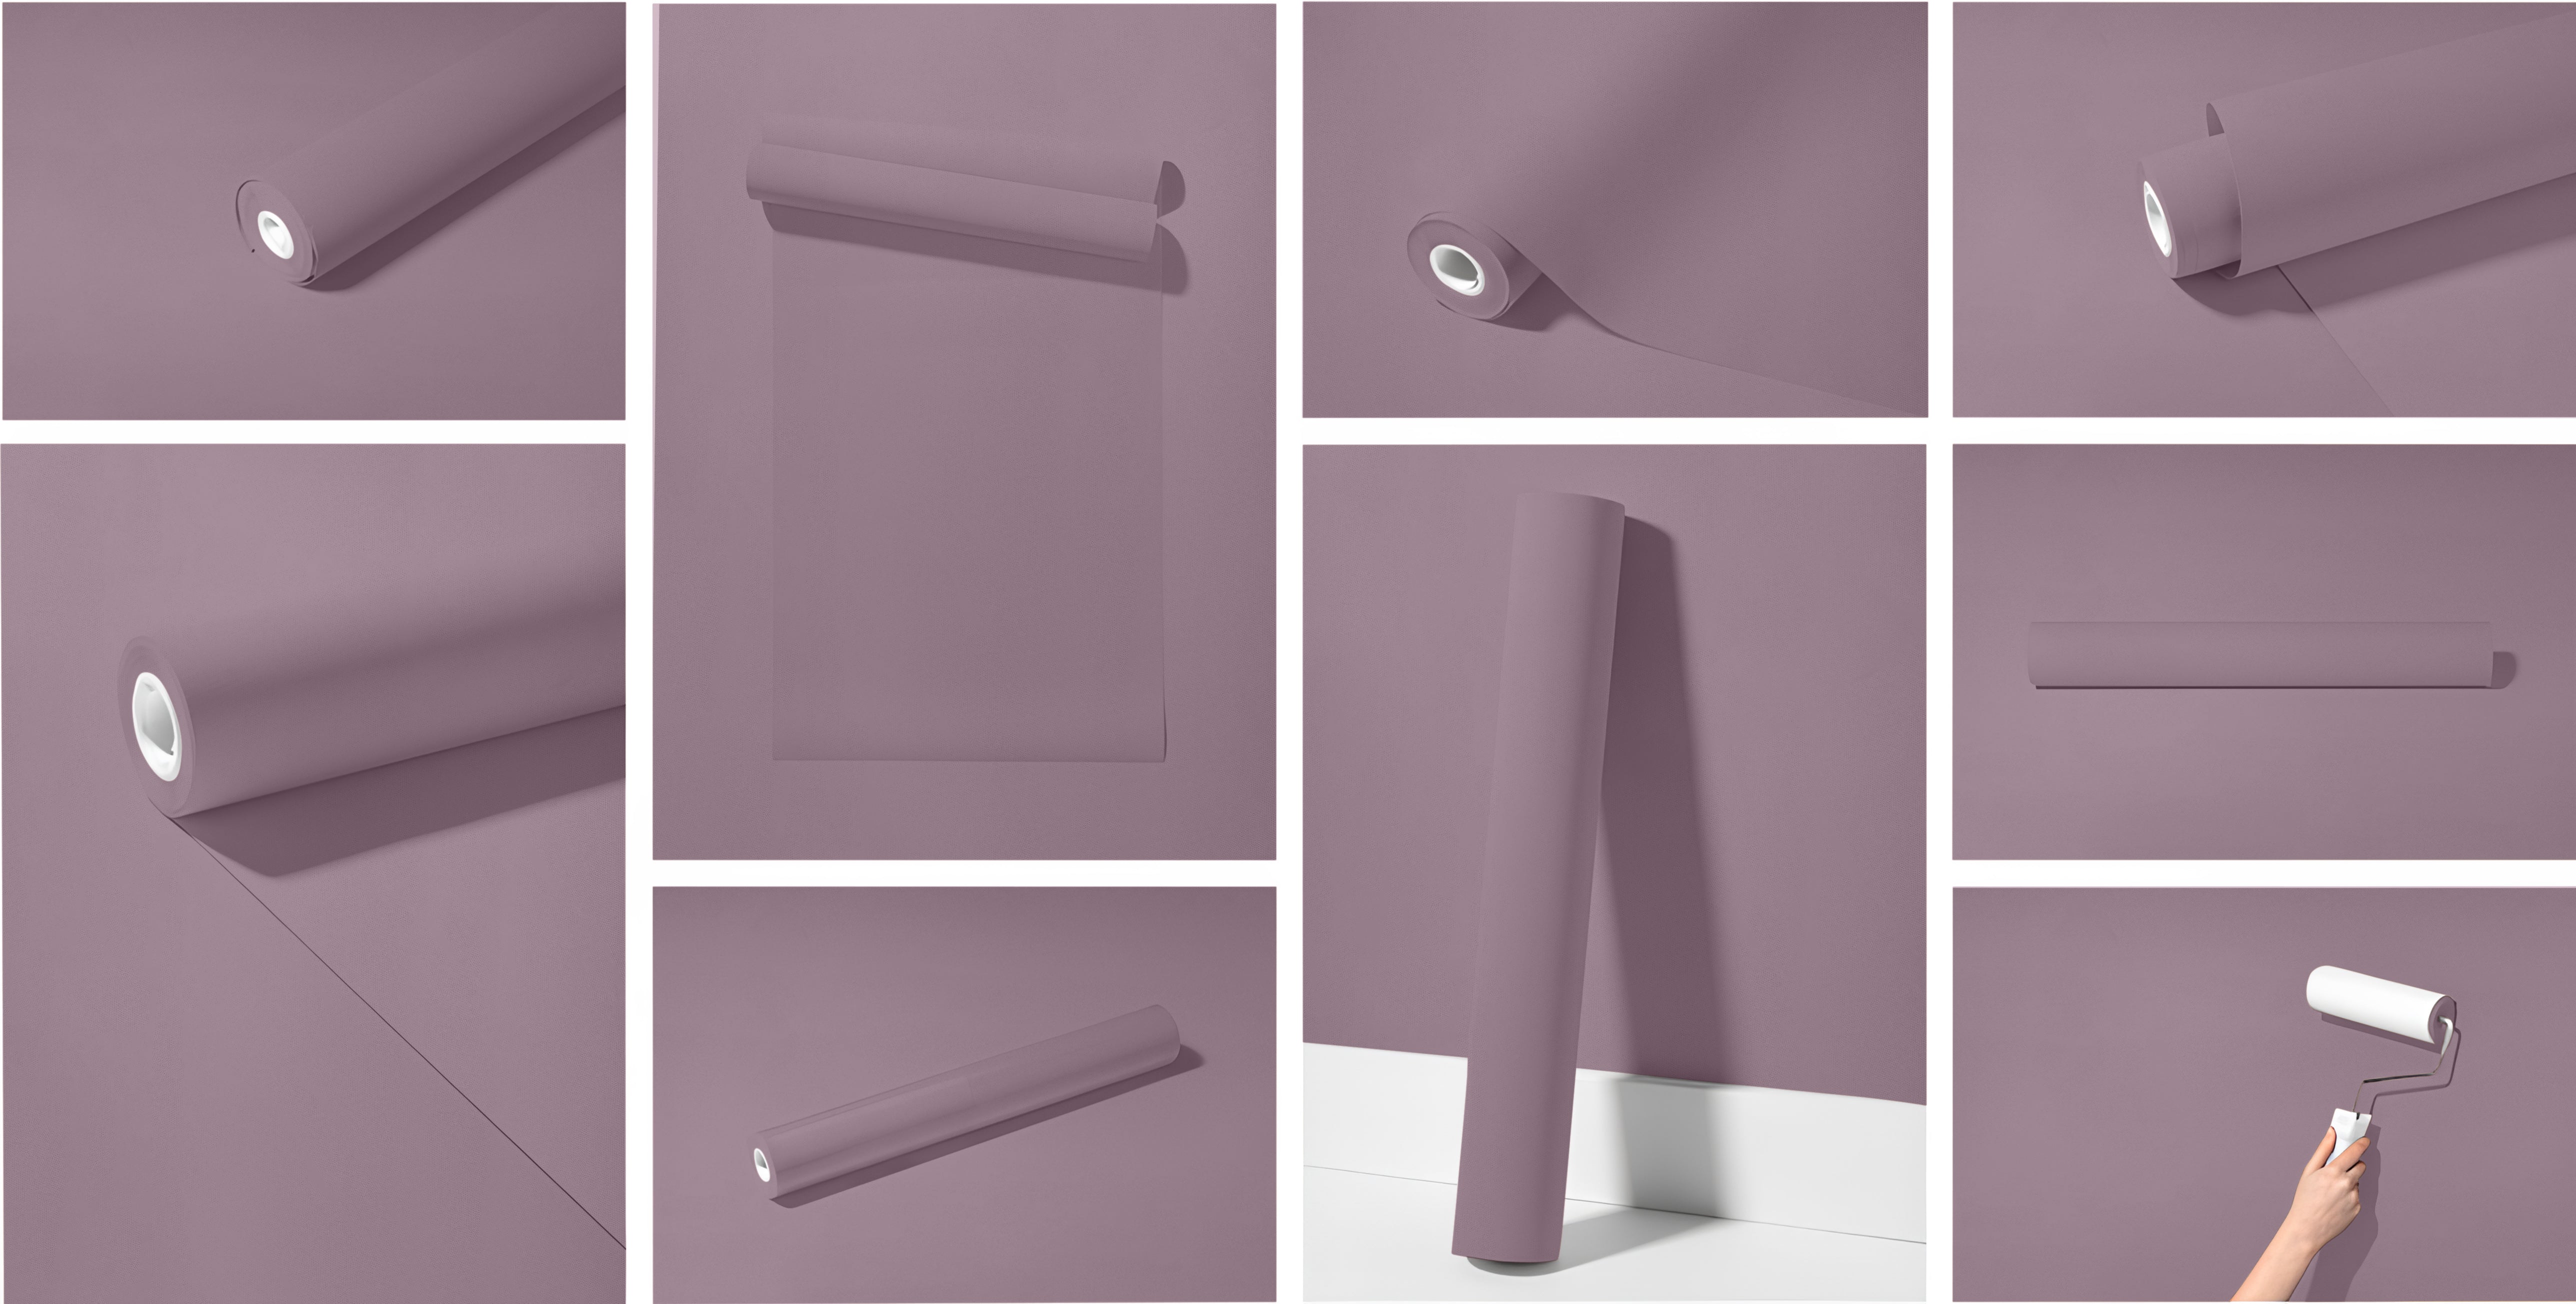 Peel & Stick Removable Re-usable Paint - Color RAL 4009 Pastel Violet - offRAL™ - RALRAW LLC, USA